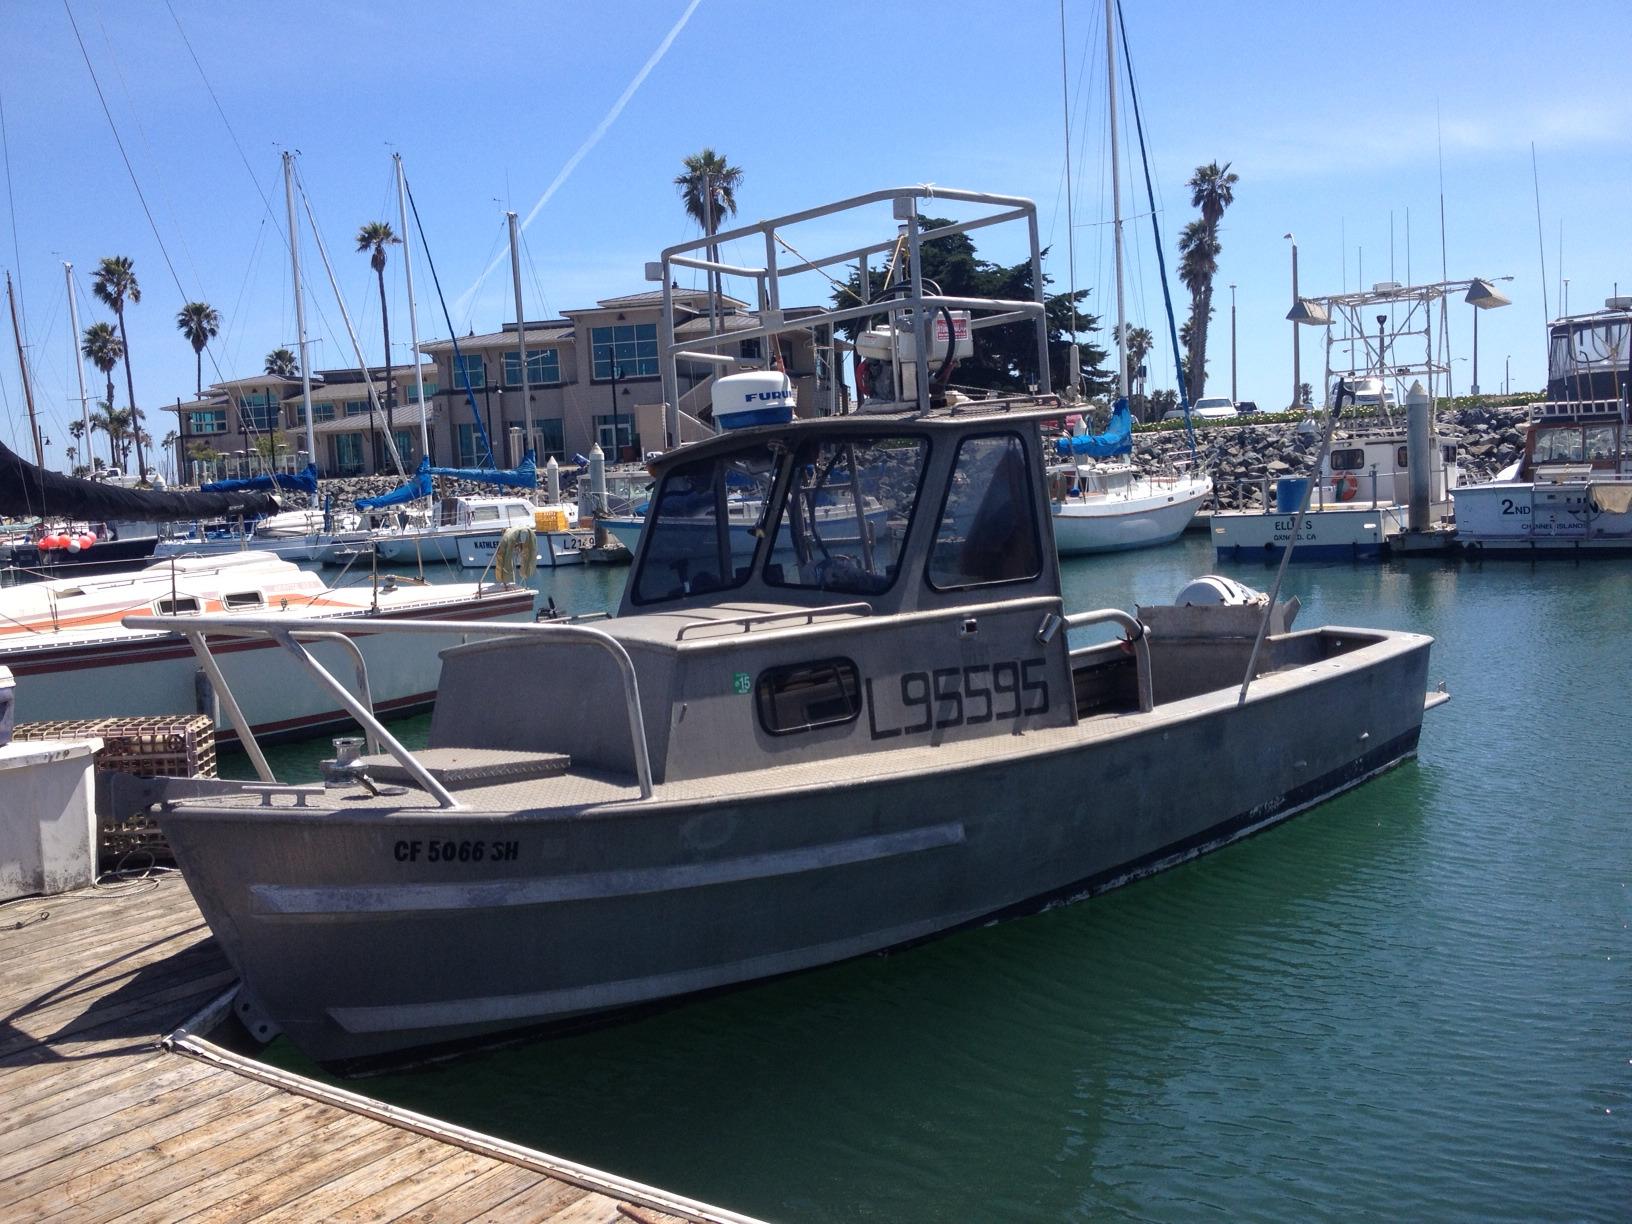 New and Used Boats for Sale in CA about 144 results for " Commercial "